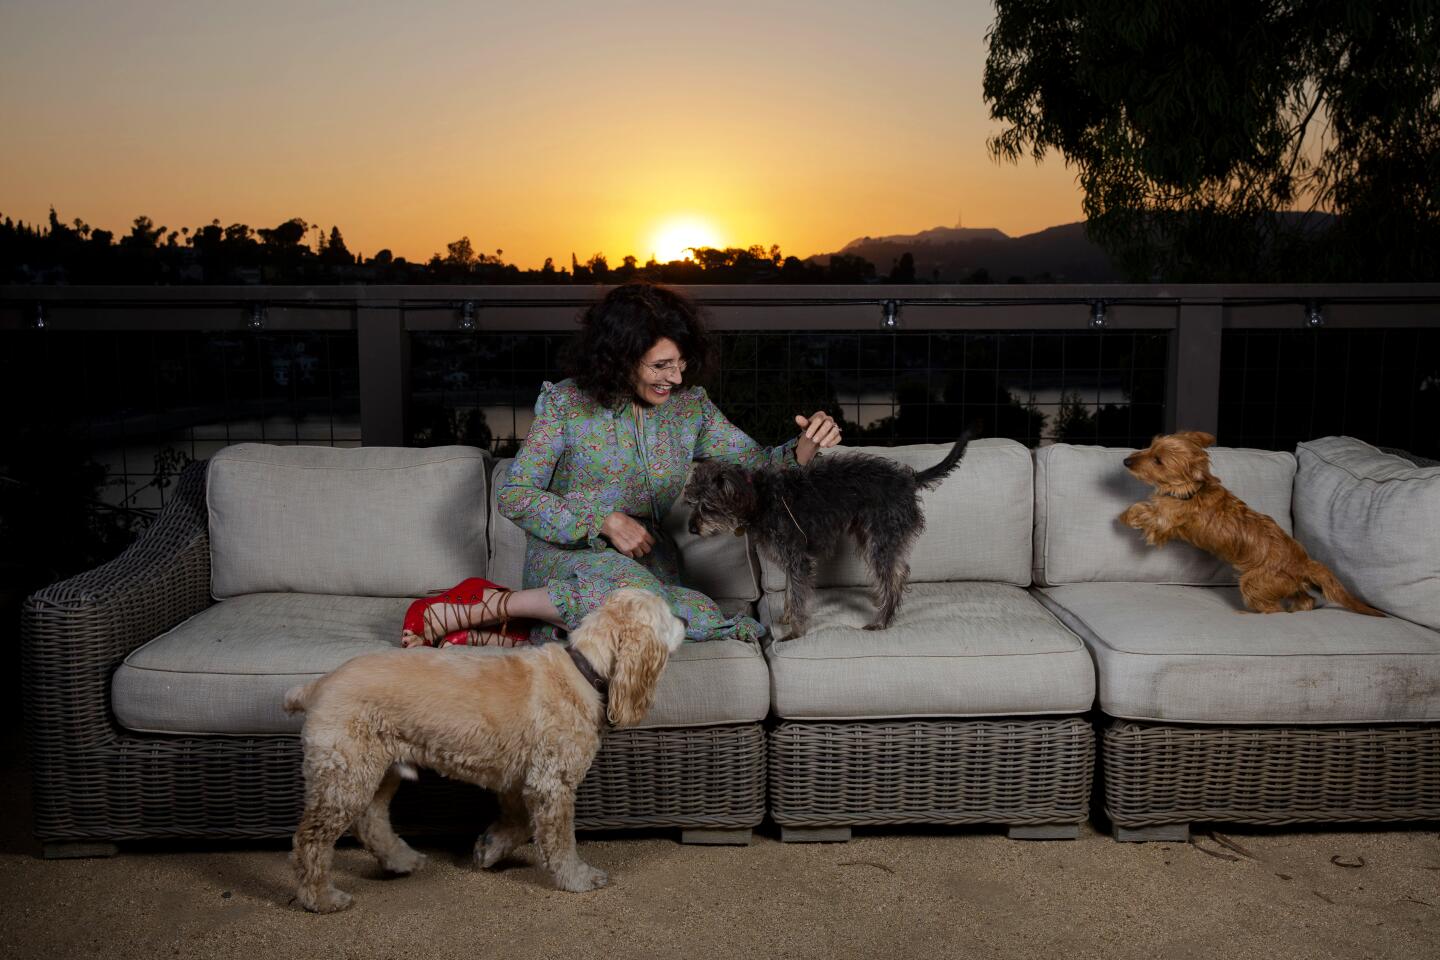 Actress Lisa Edelstein and her pets enjoy her back patio that overlooks the Silver Lake reservoir.